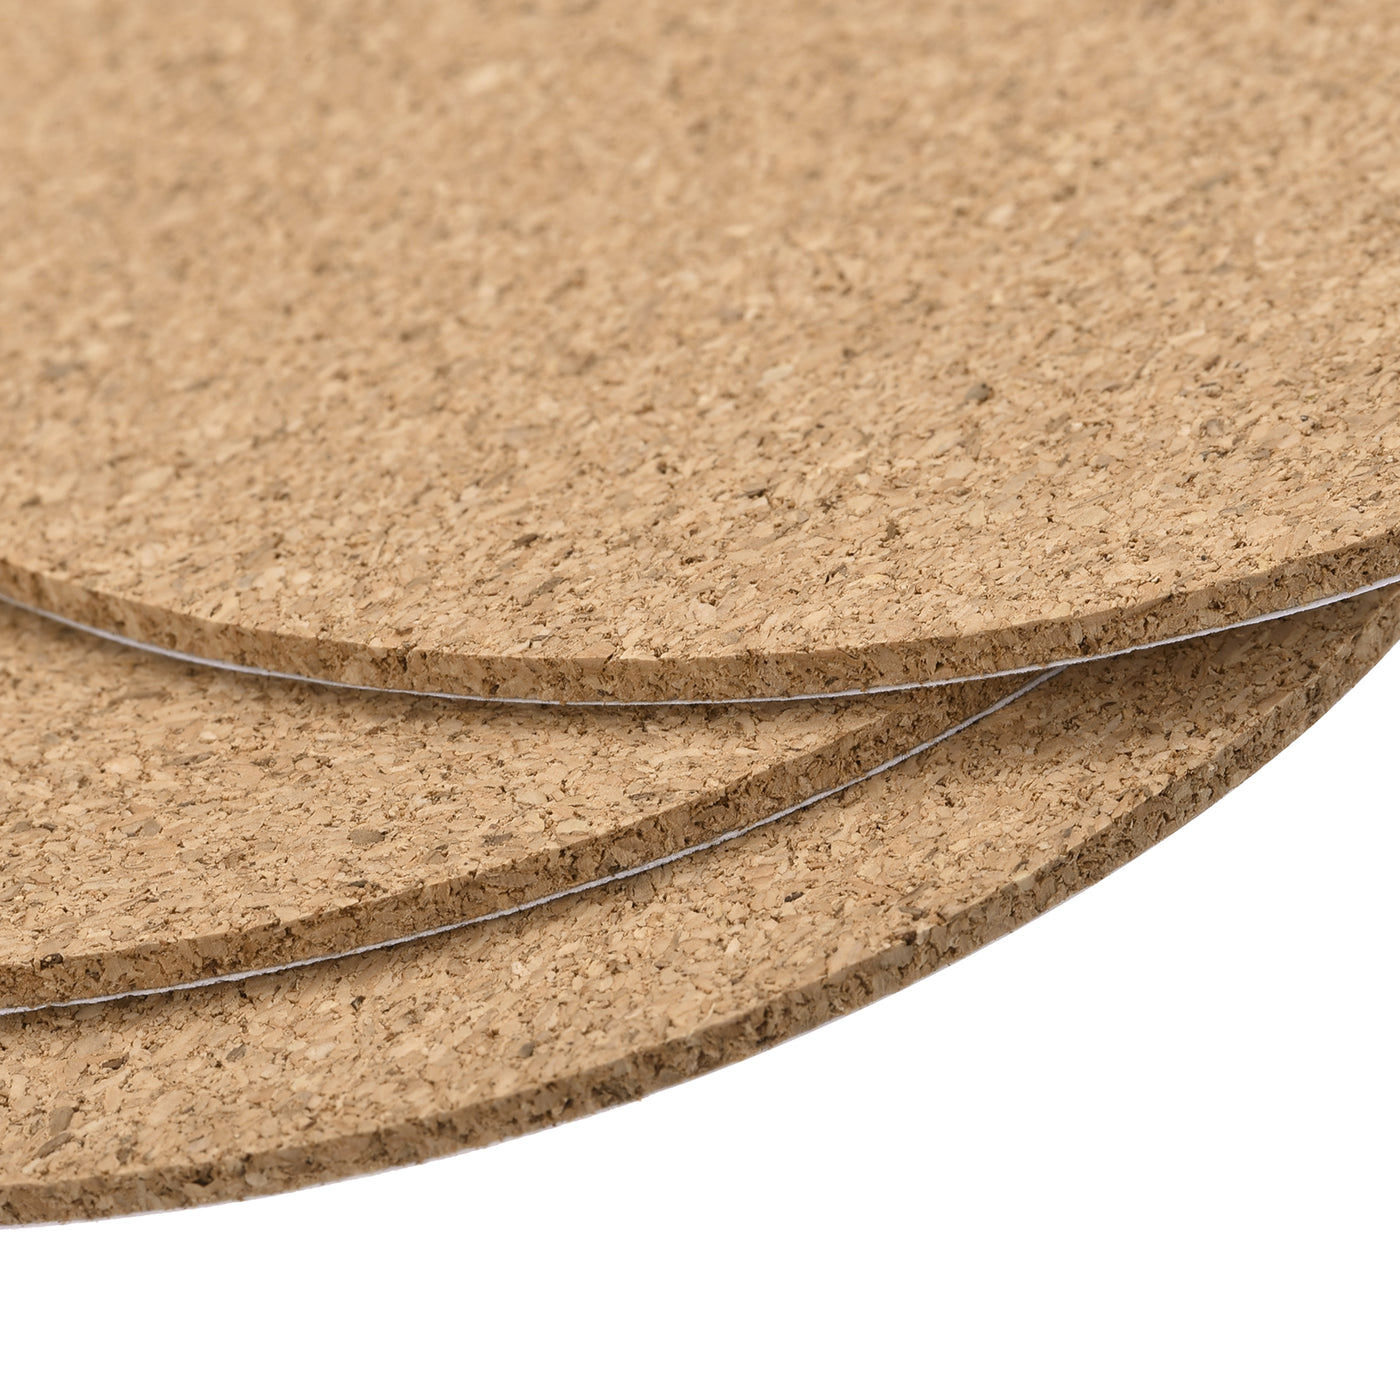 uxcell Uxcell 95mm(3.74") Round Coasters 3mm Thick Cork Cup Mat Pad for Tableware 50pcs